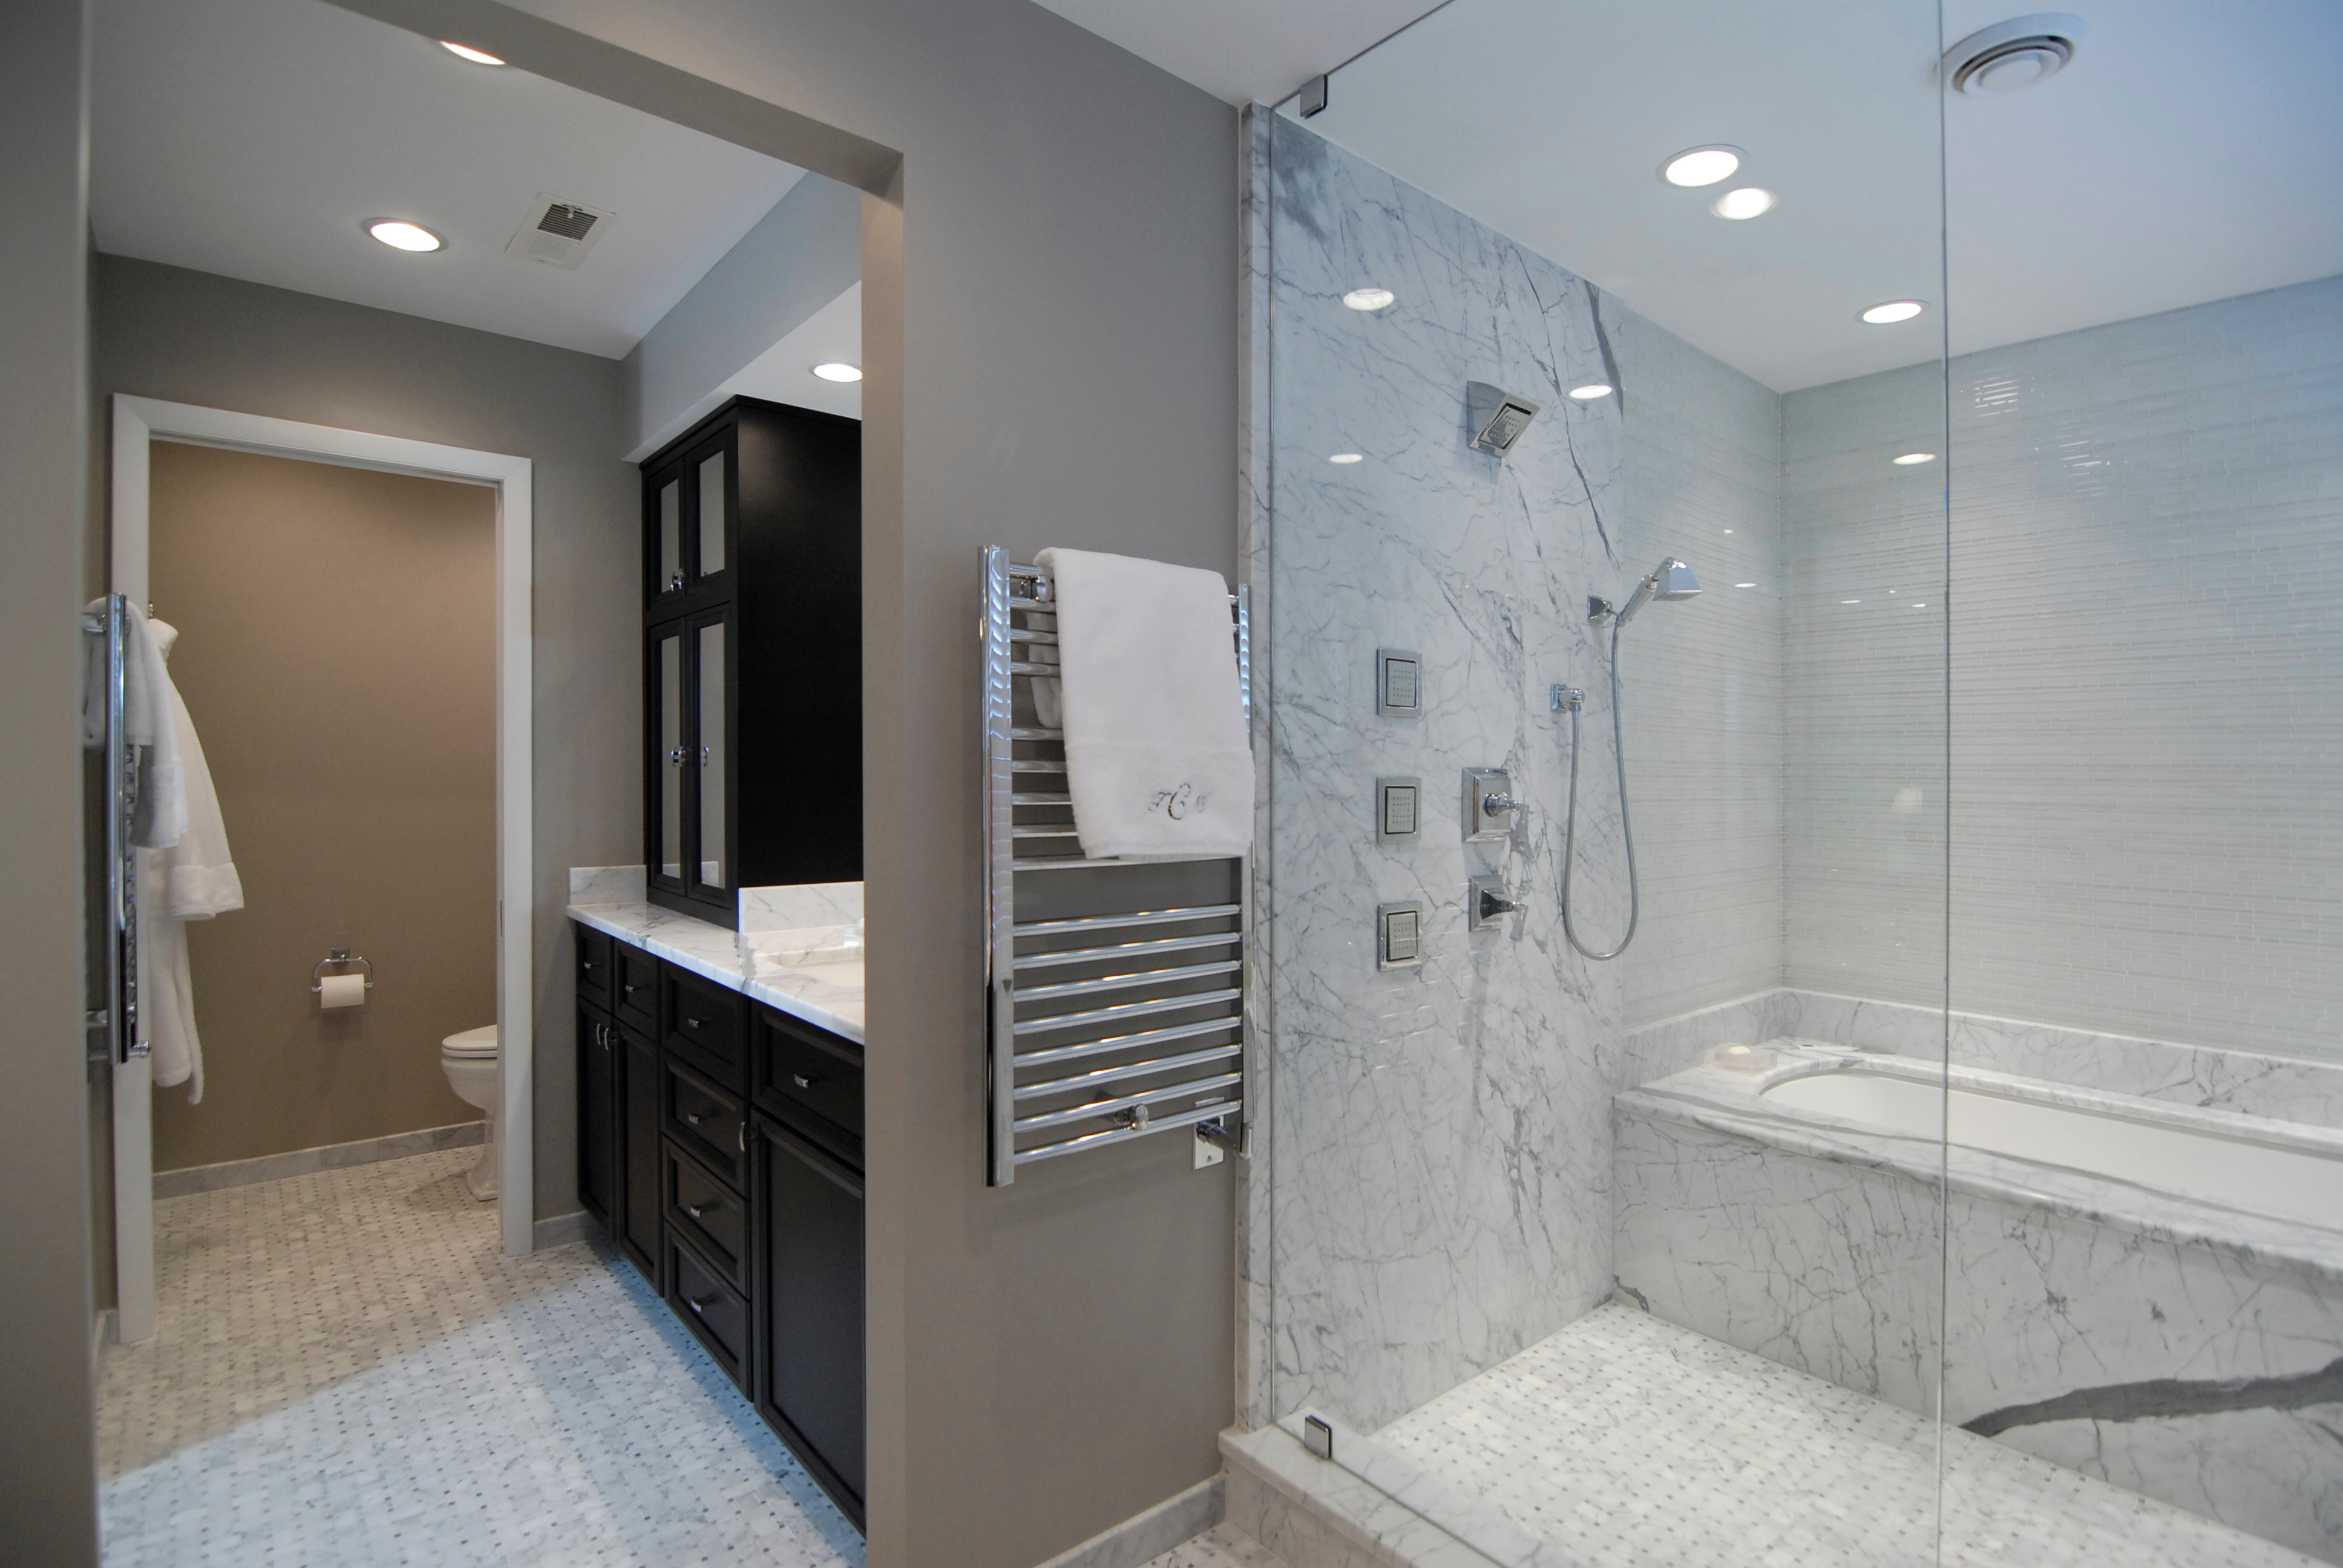 Espresso finish bathroom cabinets and walk in shower and tub combination.